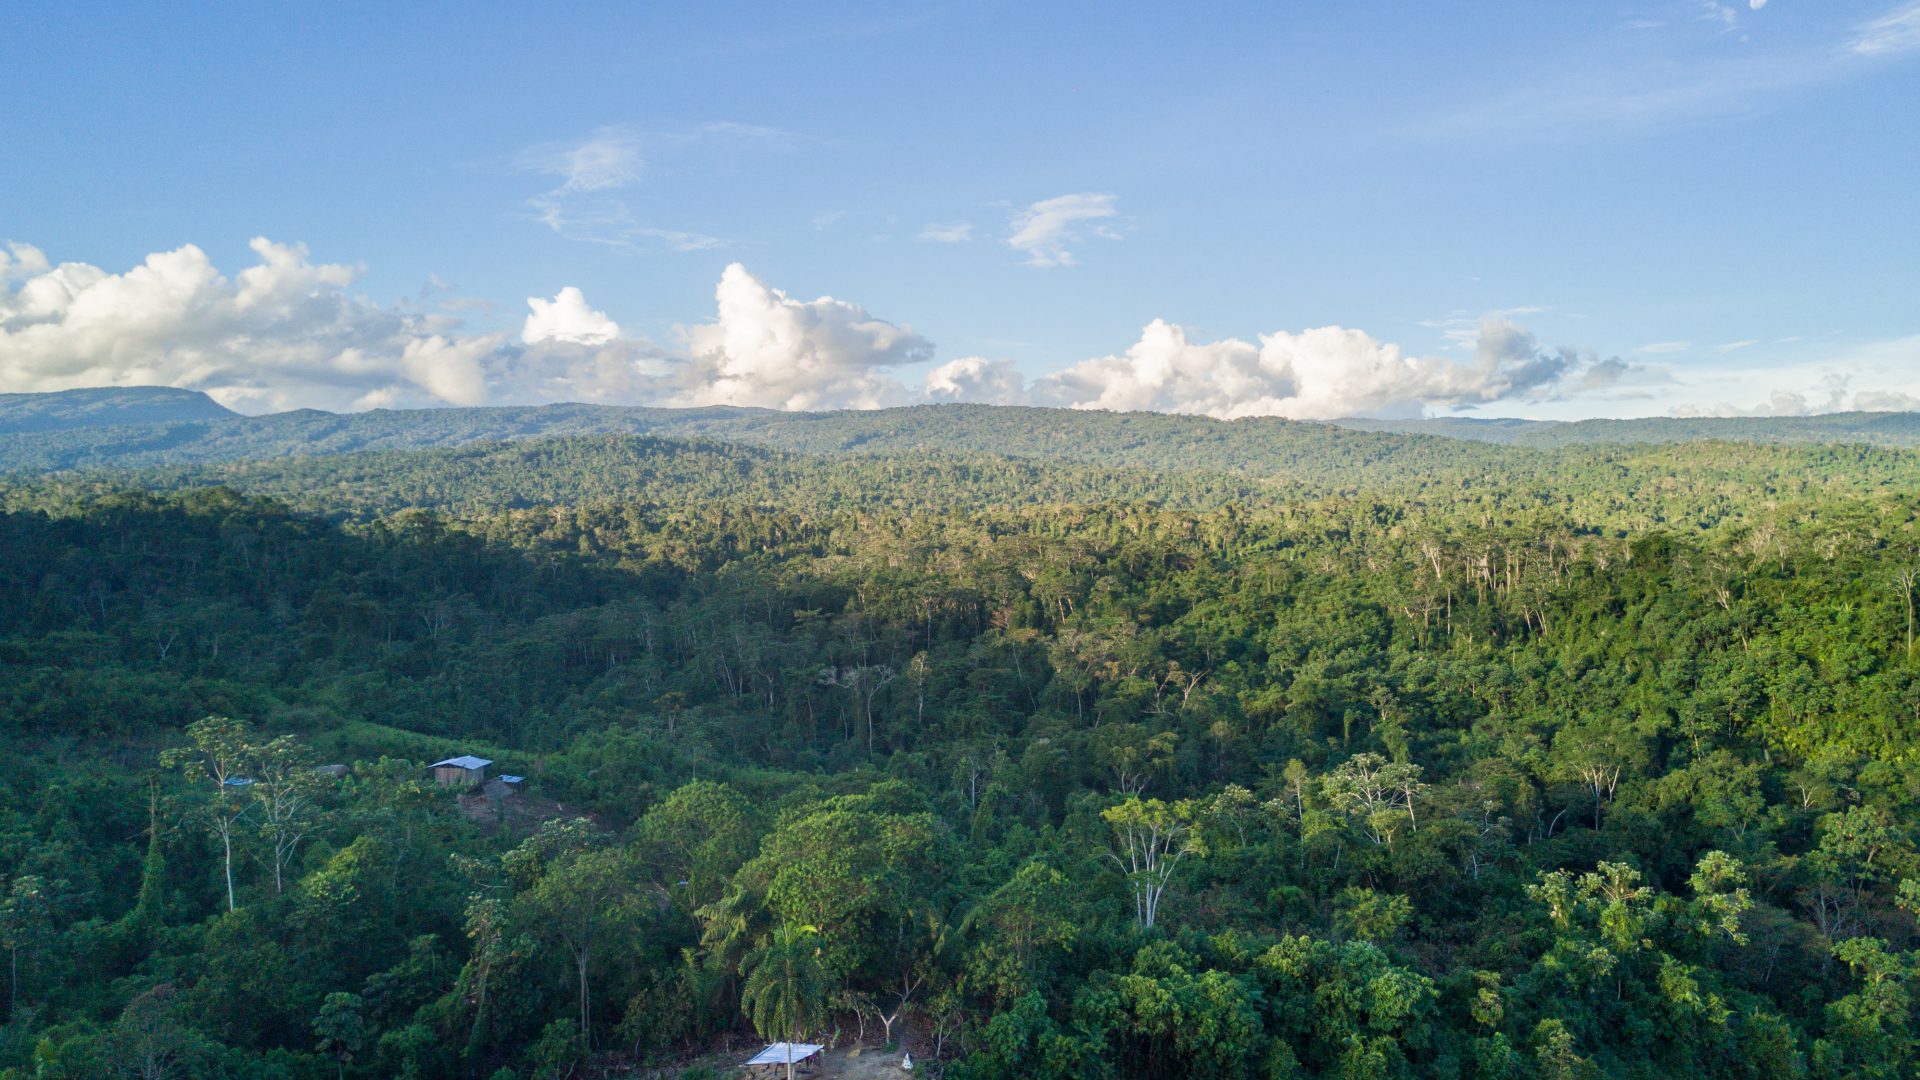 Aerial image of rainforest stretching to the horizon behind a small village.